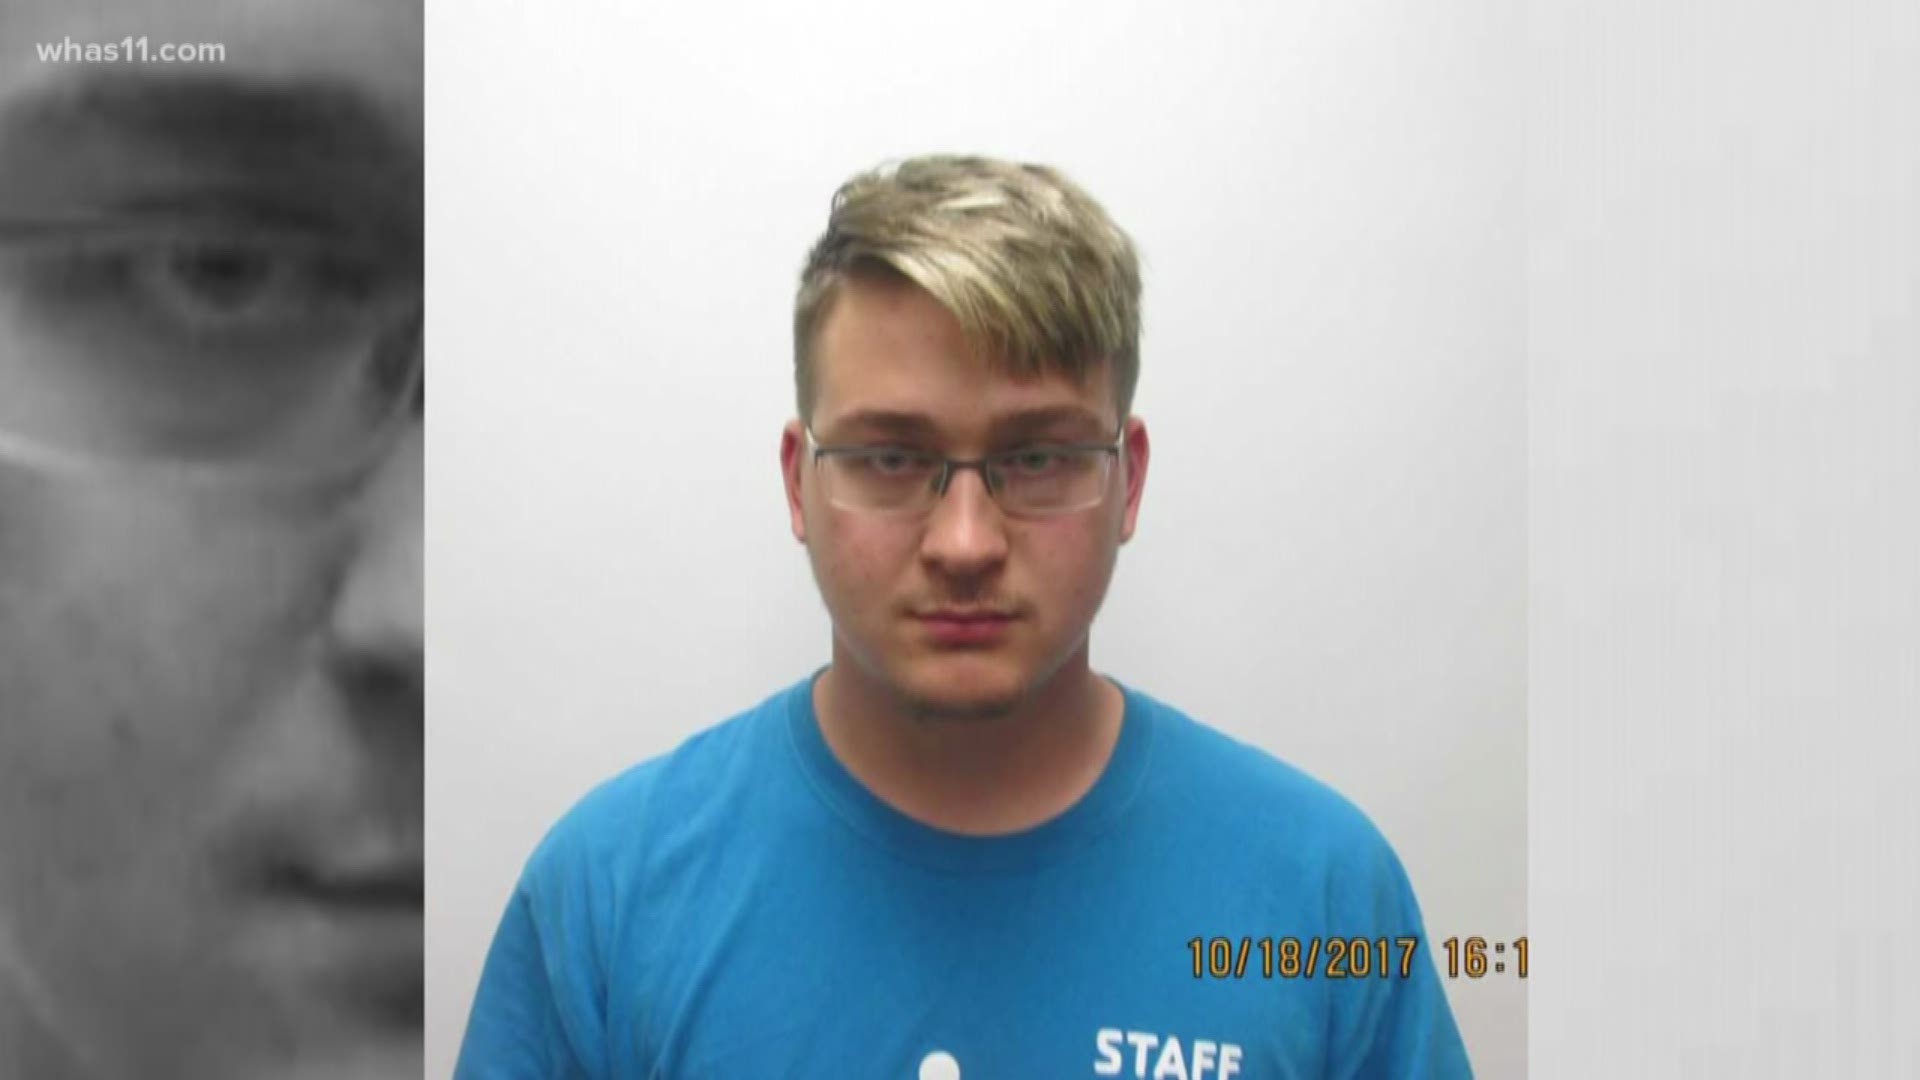 Eighteen-year-old Michael Begin Junior appeared in a Clark County, Indiana courtroom Oct. 23, accused of inappropriately touching two 6-year-old girls. The judge decided to release him with an electronic monitoring device. Our Kayla Moody spoke with the p